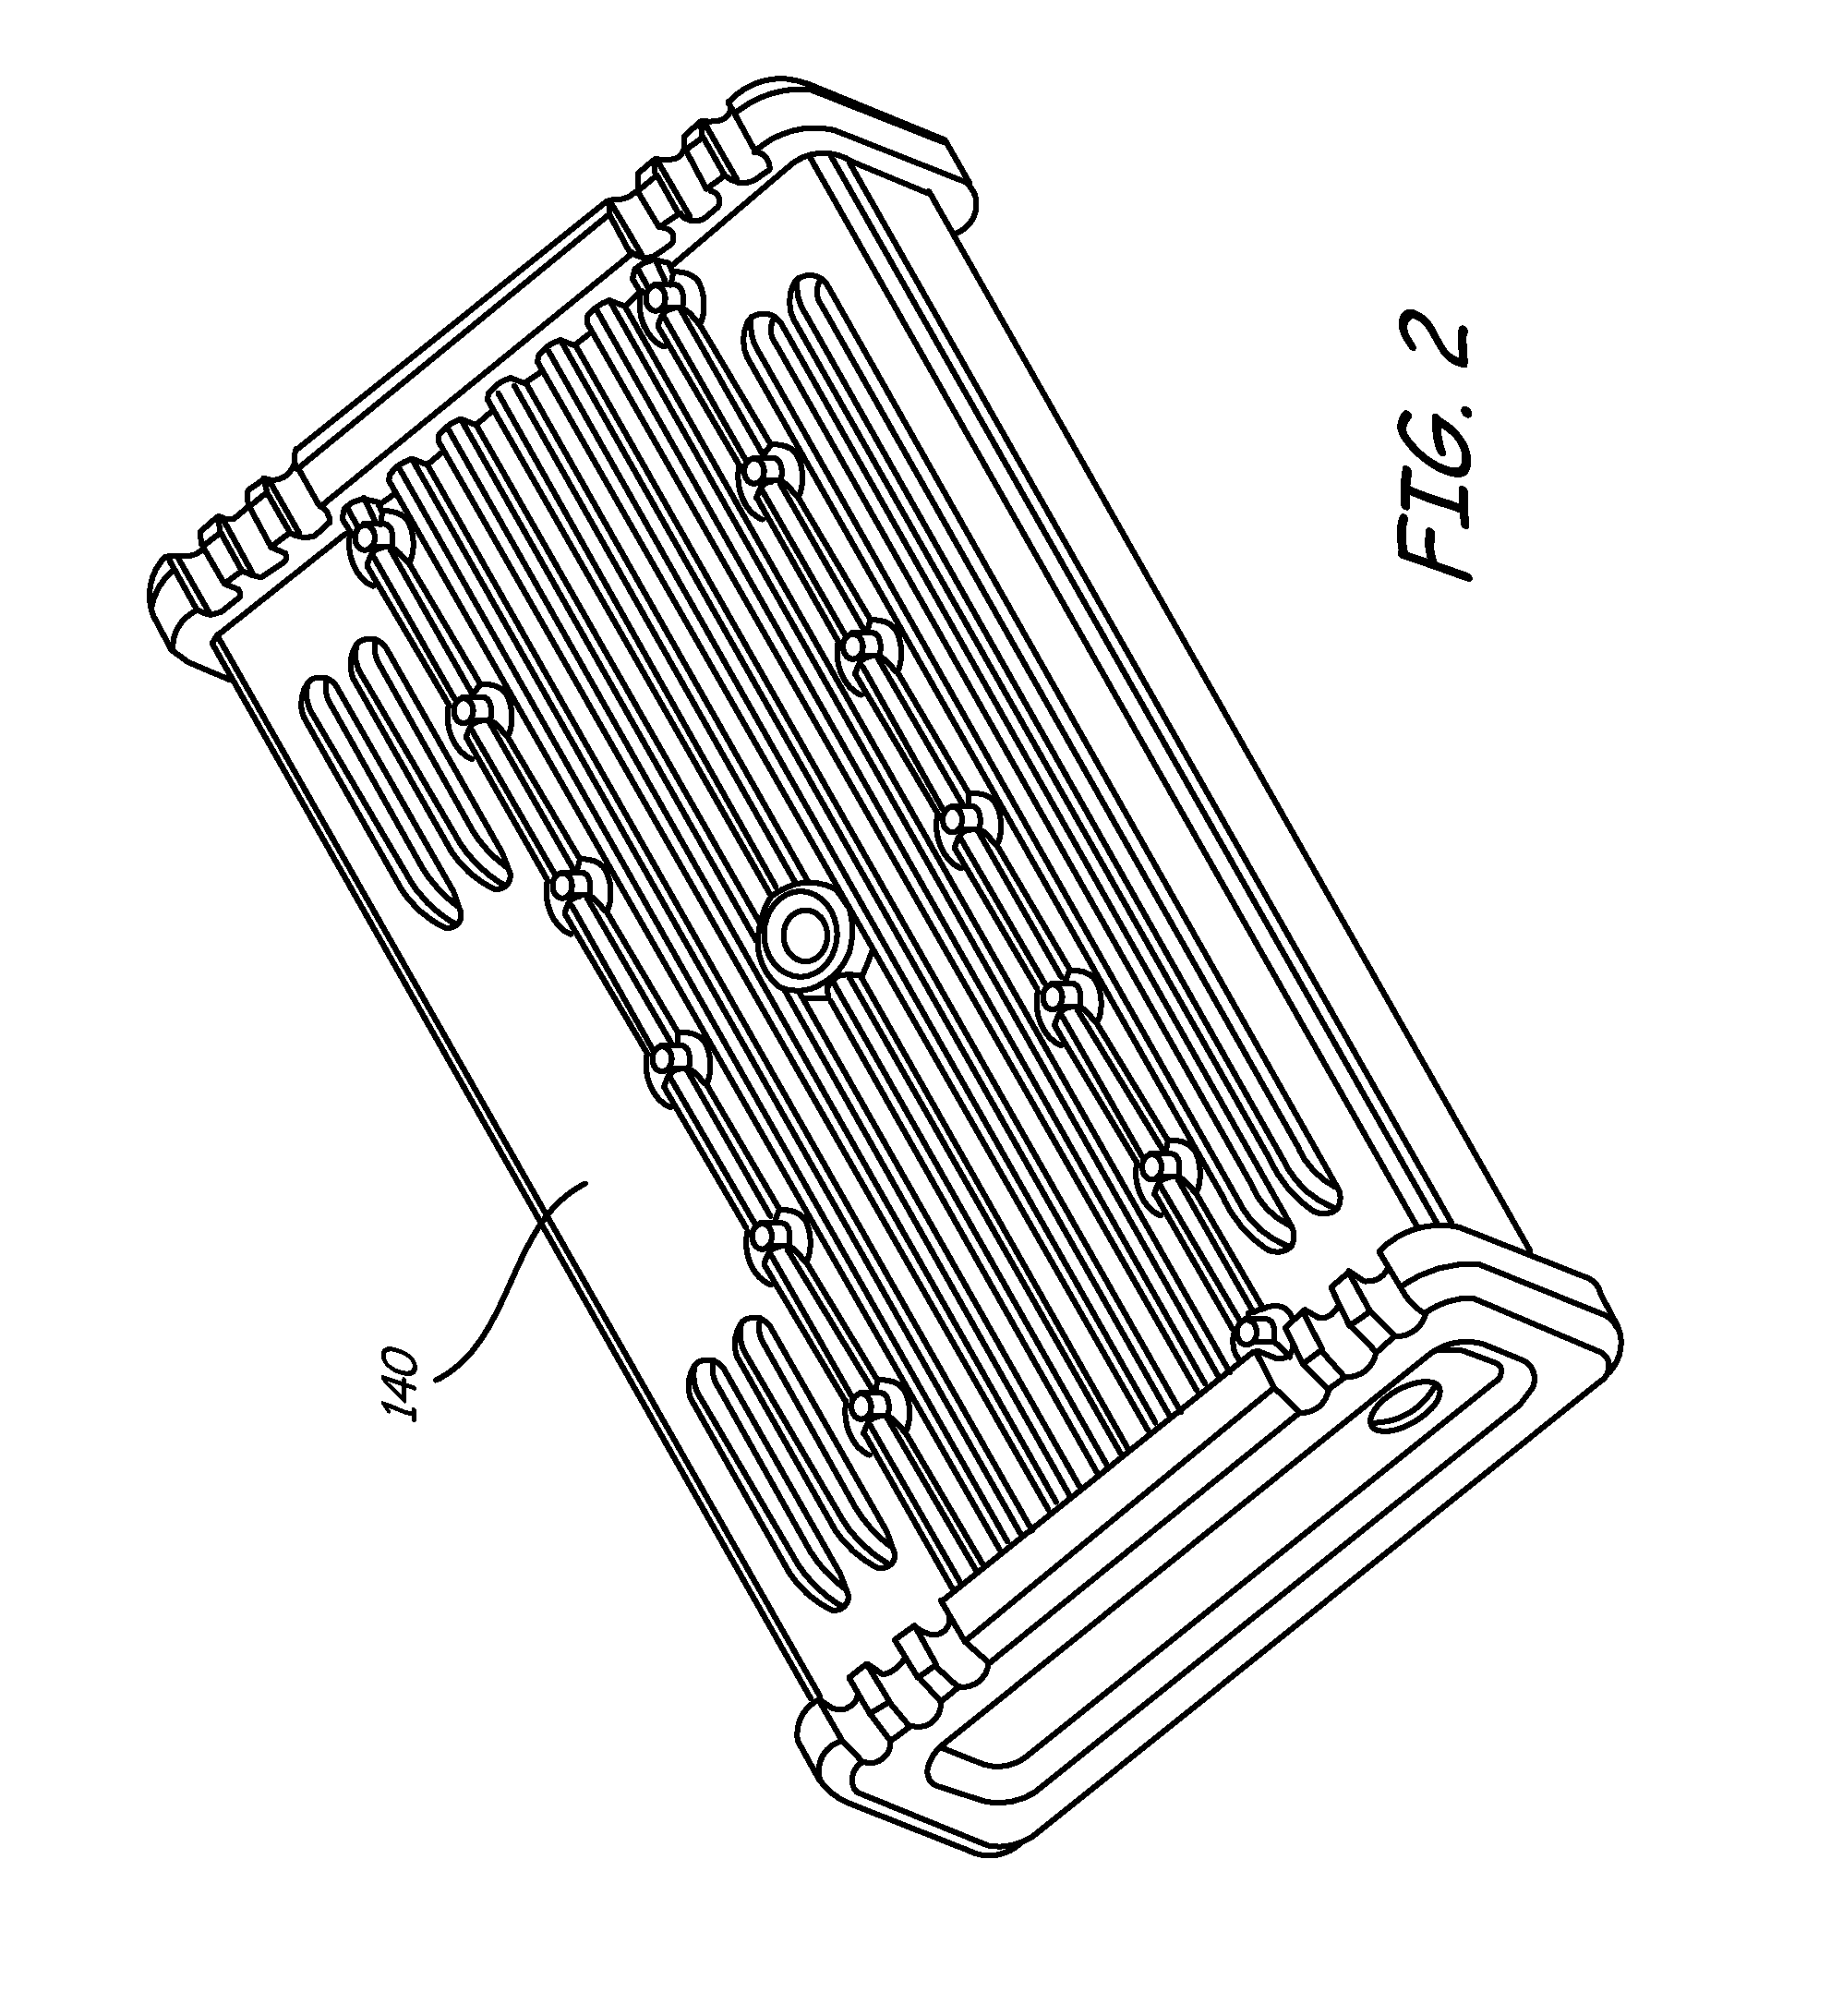 Battery maintenance device with thermal buffer